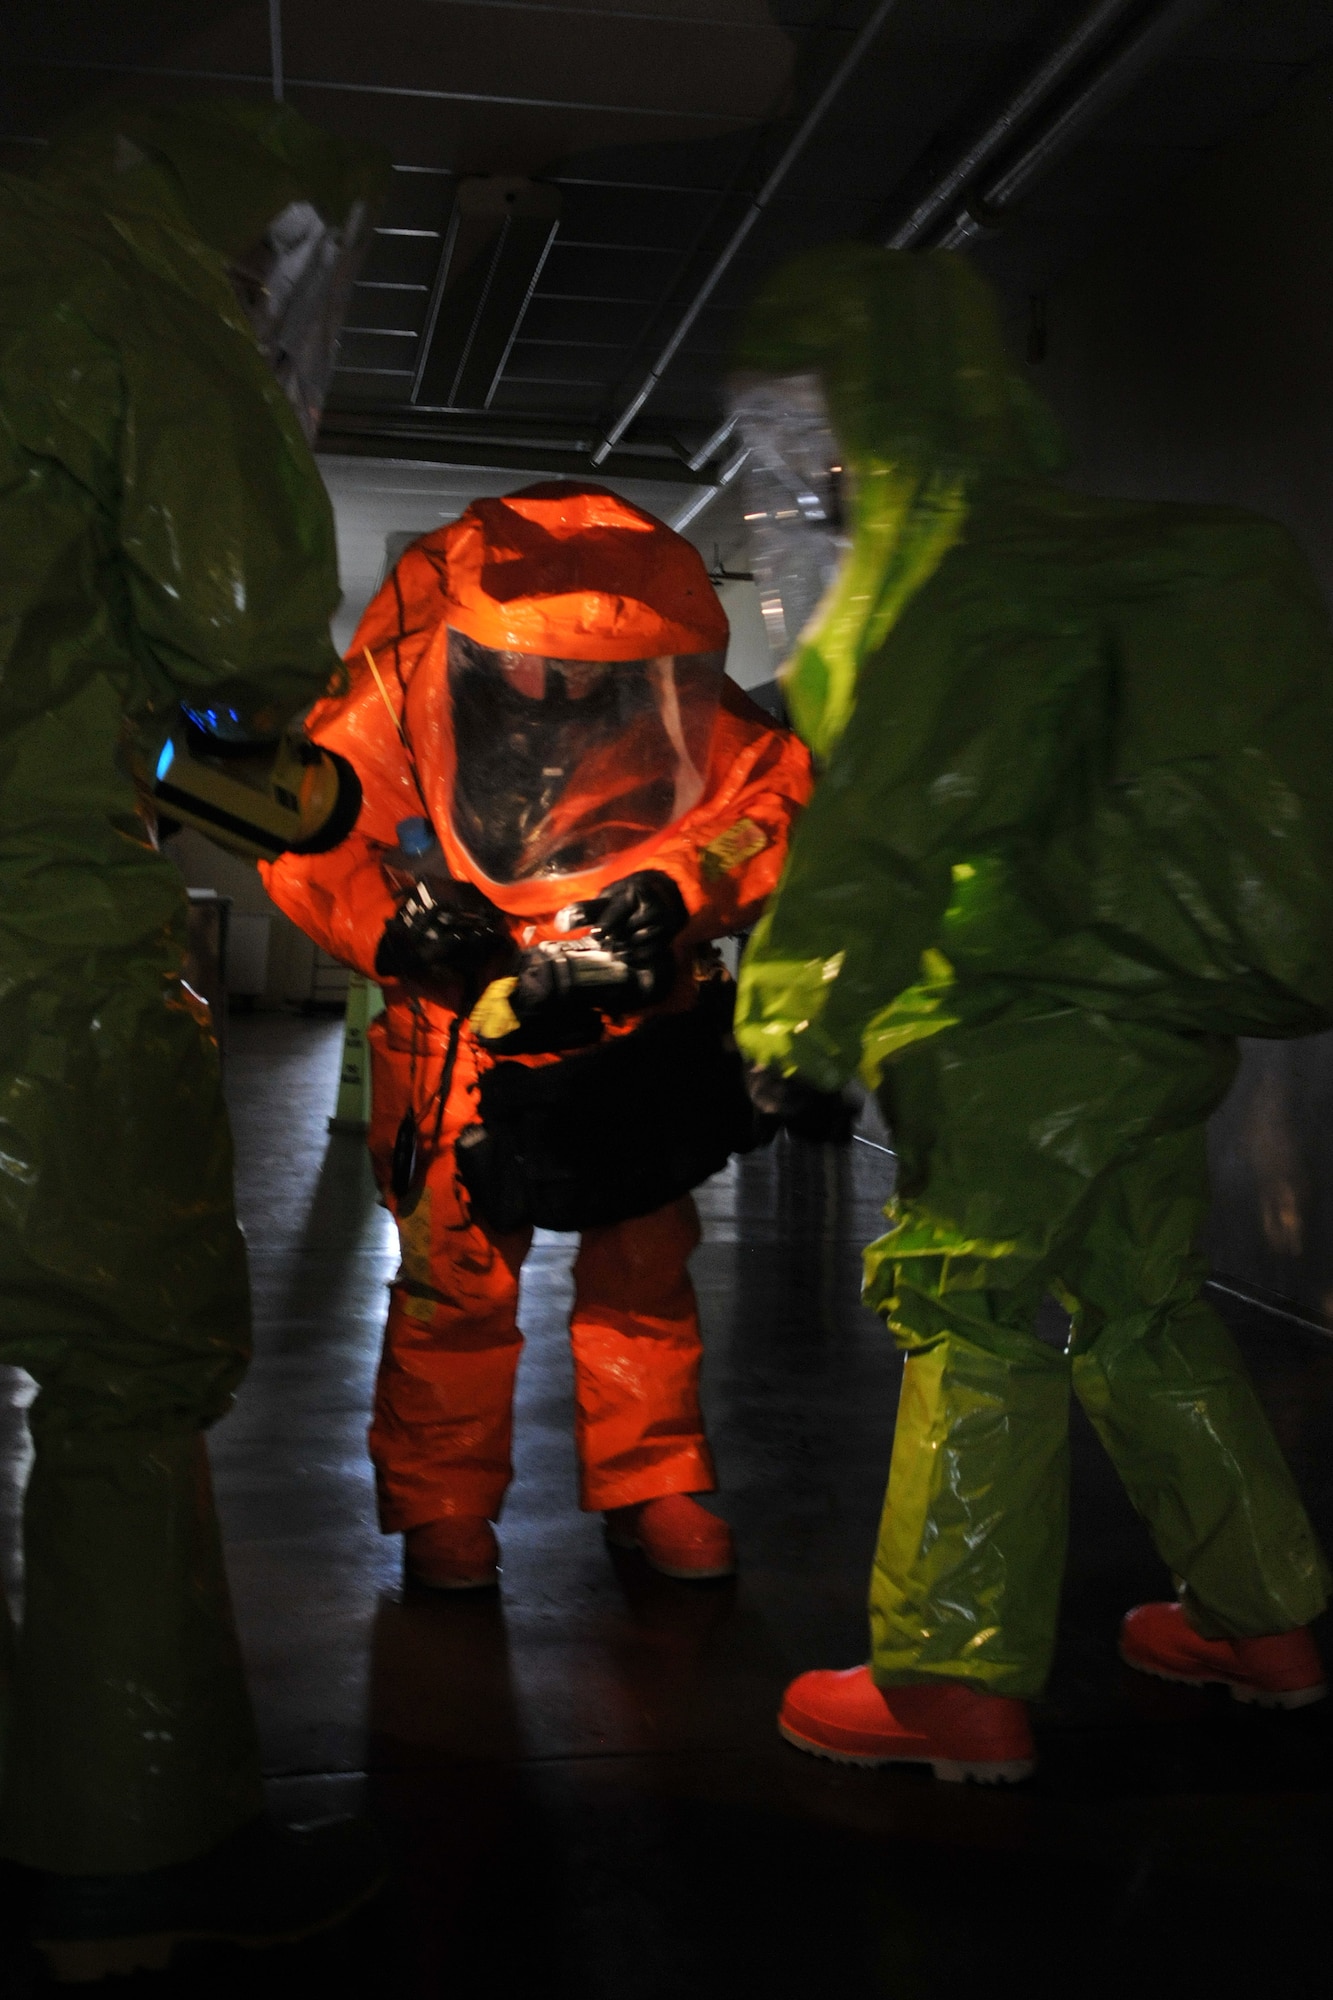 Members of the 180th Fighter Wing Ohio Air National Guard and 127th Wing Michigan National Guard prepare themselves by gathering the instruments necessary before making entry into a simulated hazmat lab in an abandoned downtown Toledo school March 10, 2016. The training exercise was designed to enhance familiarization of equipment and build partnership with civil and military organizations to strengthen real-world emergency response capabilities. (Air National Guard photo by Airman 1st Class Benjamin A. Maciejewski)